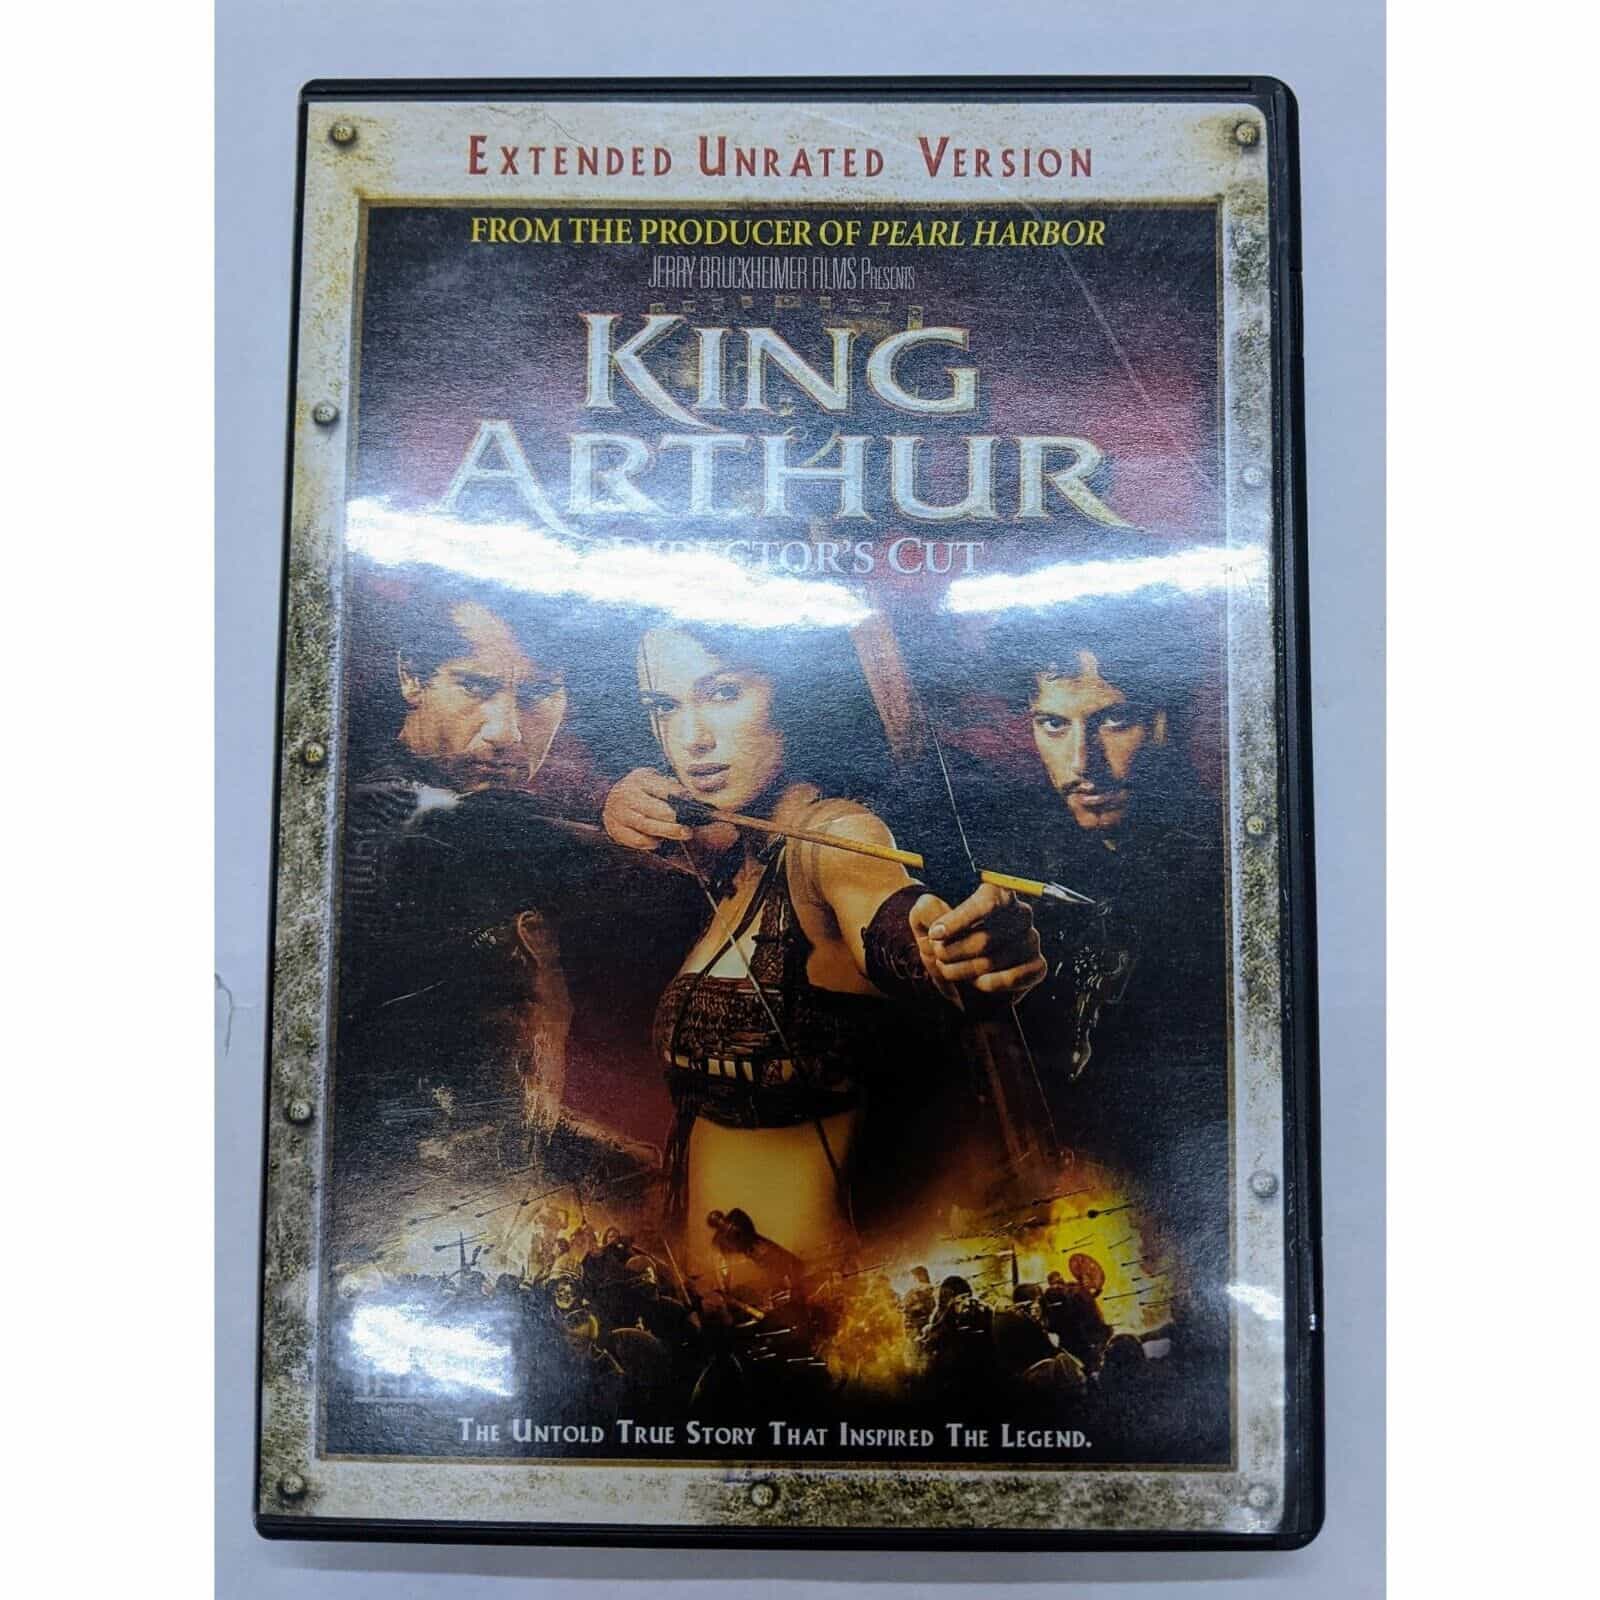 King Arthur Director’s Cut DVD Movie – Extended Unrated Cut